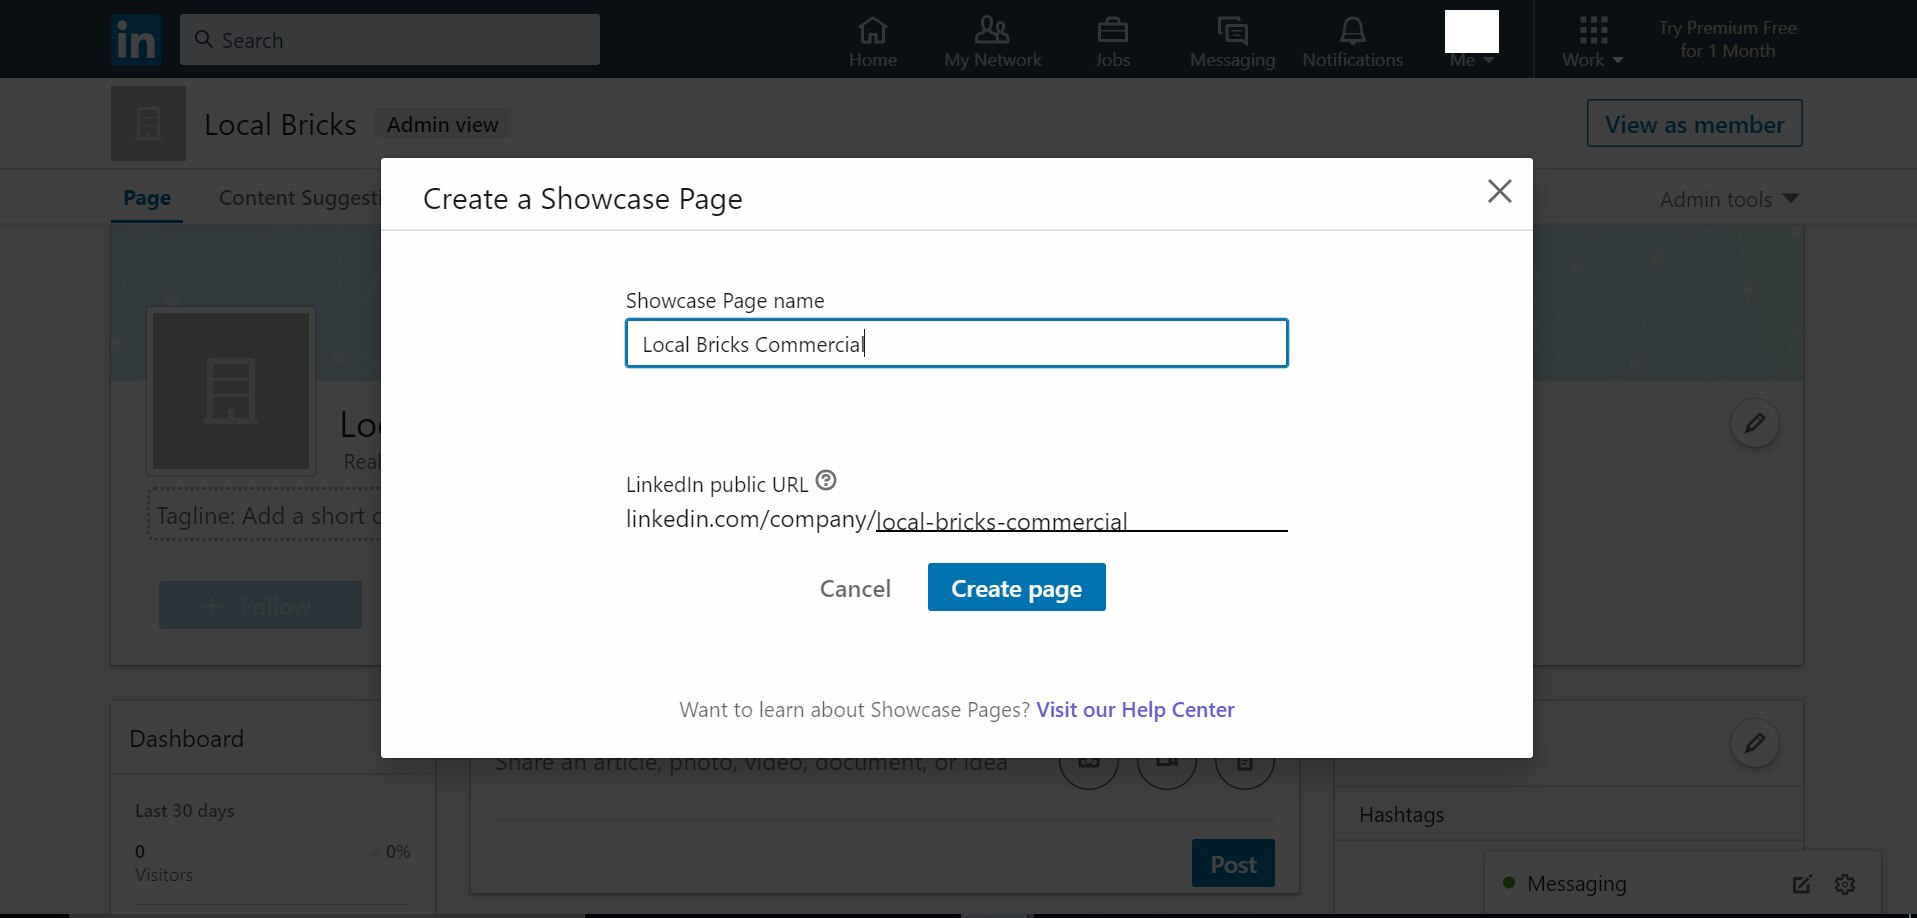 LinkedIn admin page showing various fields to be filled for creating LinkedIn Showcase Page